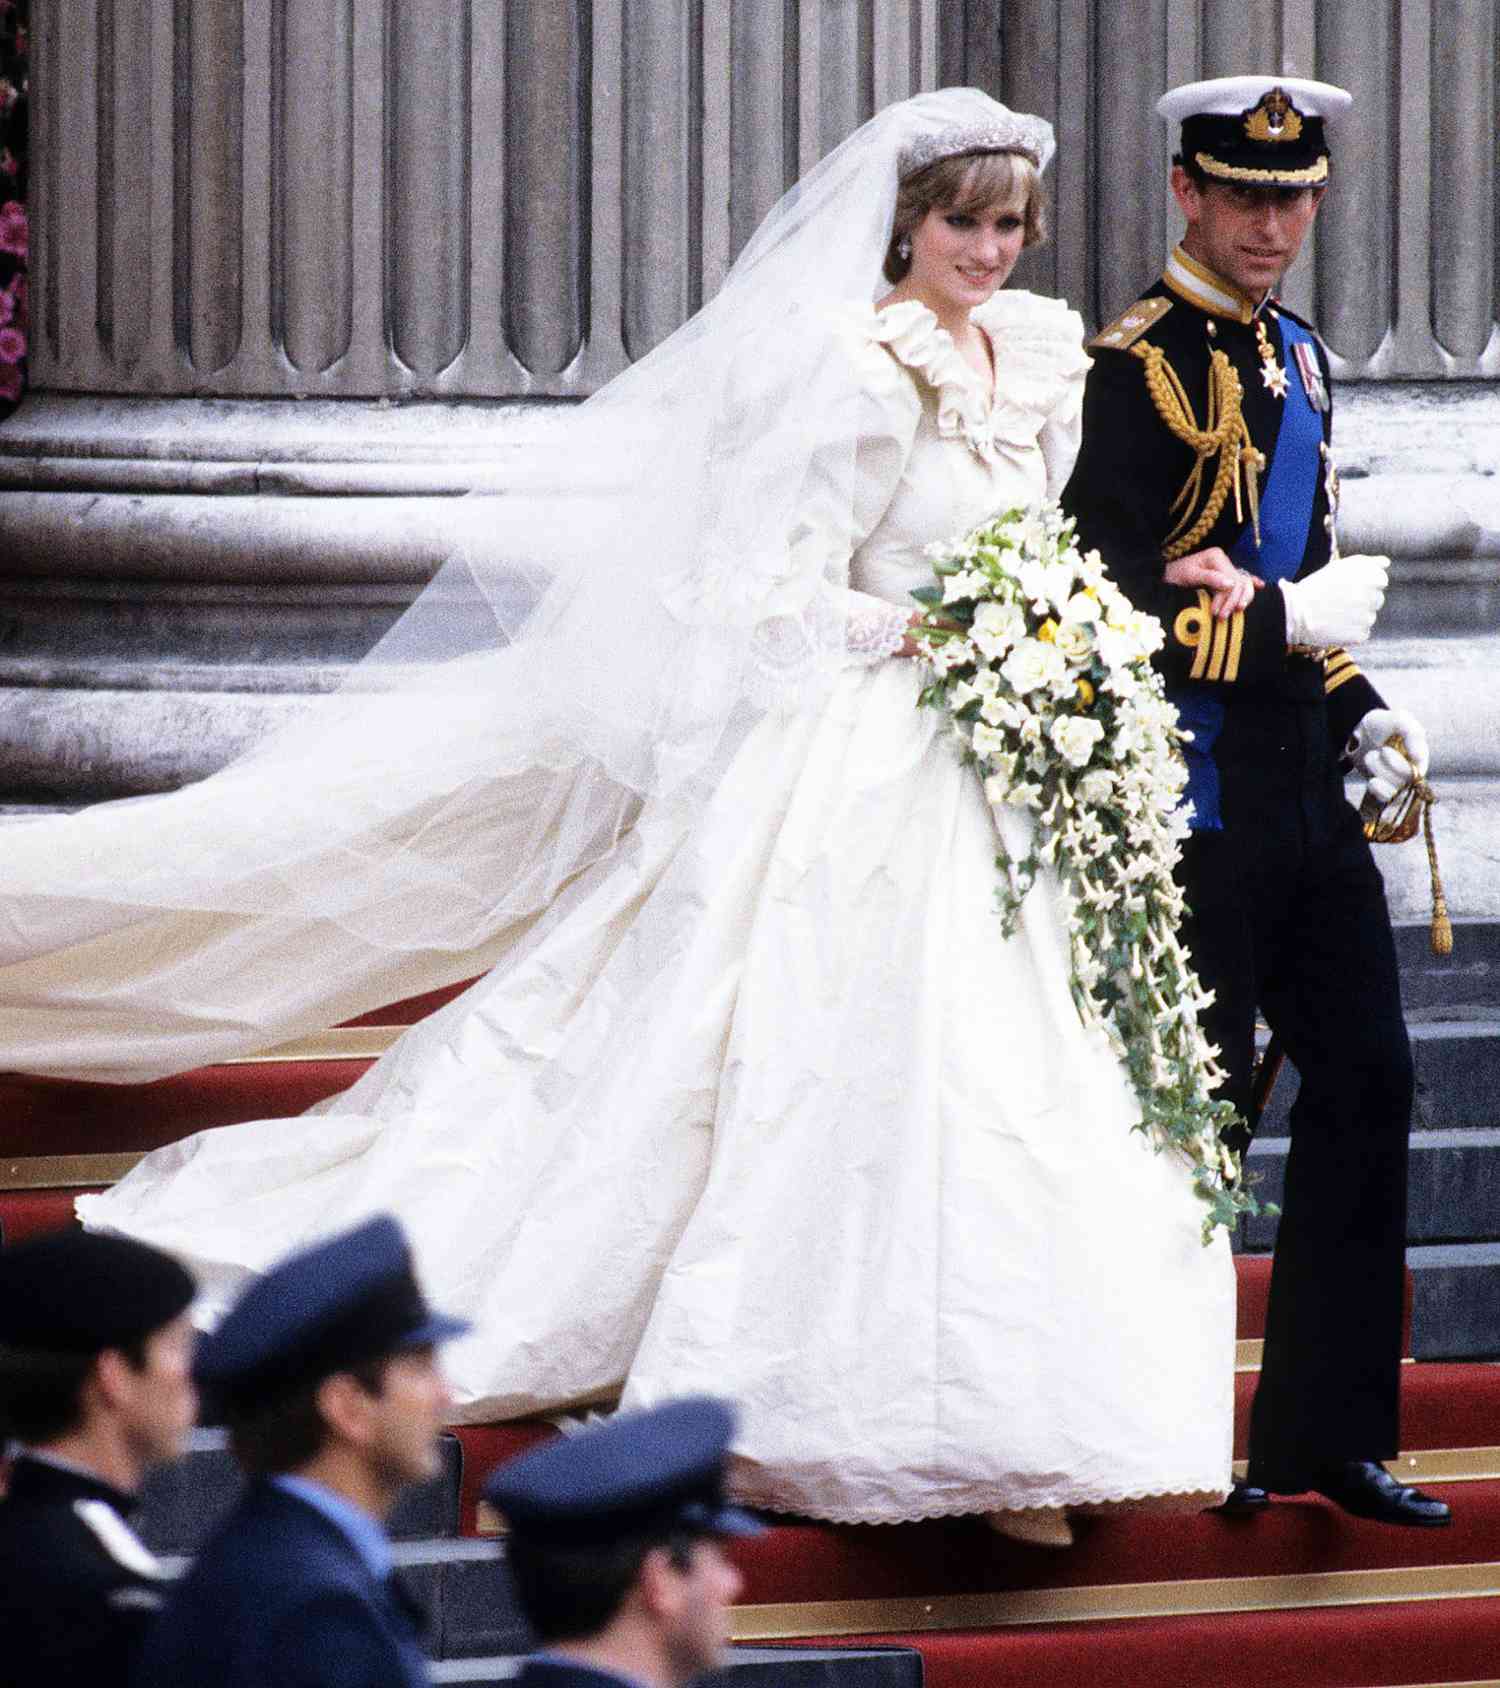 DIANA HAD TWO WEDDING BOUQUETS &mdash; BECAUSE OF THE QUEEN